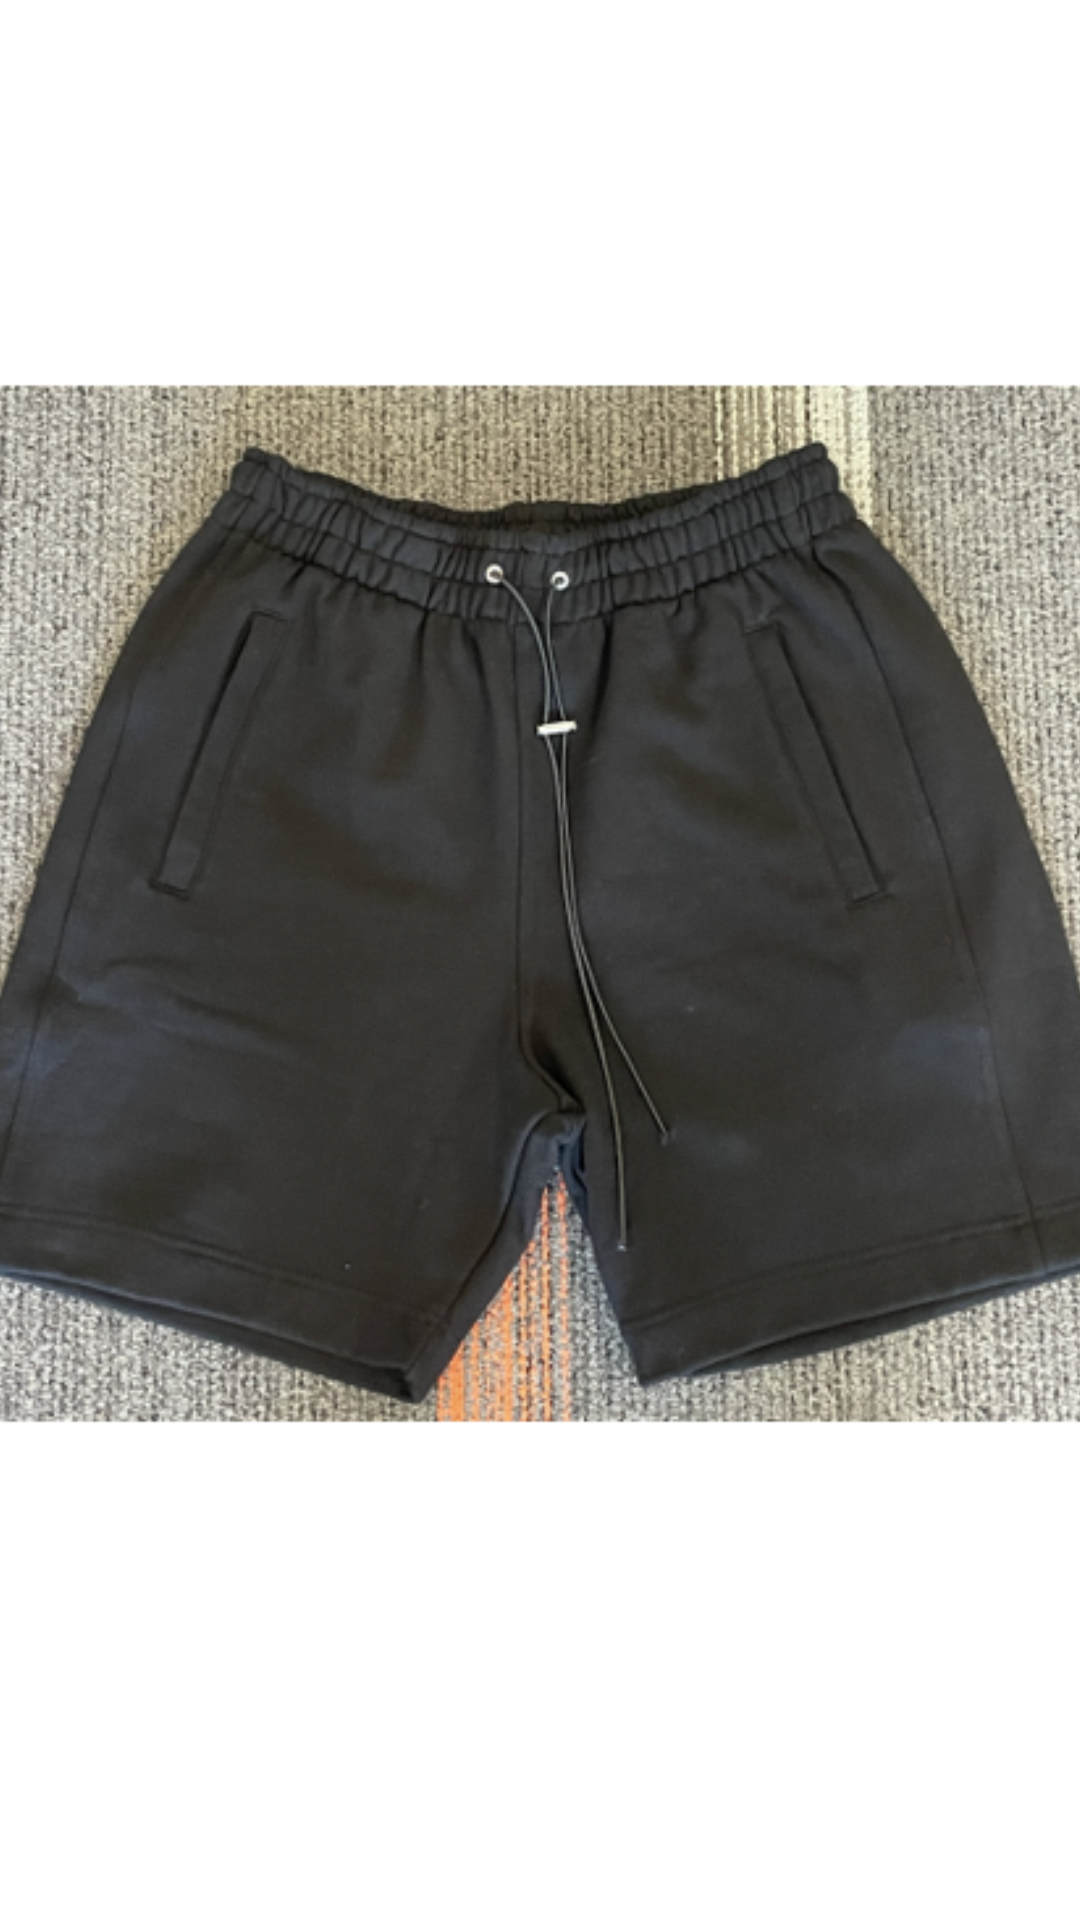 Heavy Terry Shorts - ASBX - Portugal Clothing Manufacturers